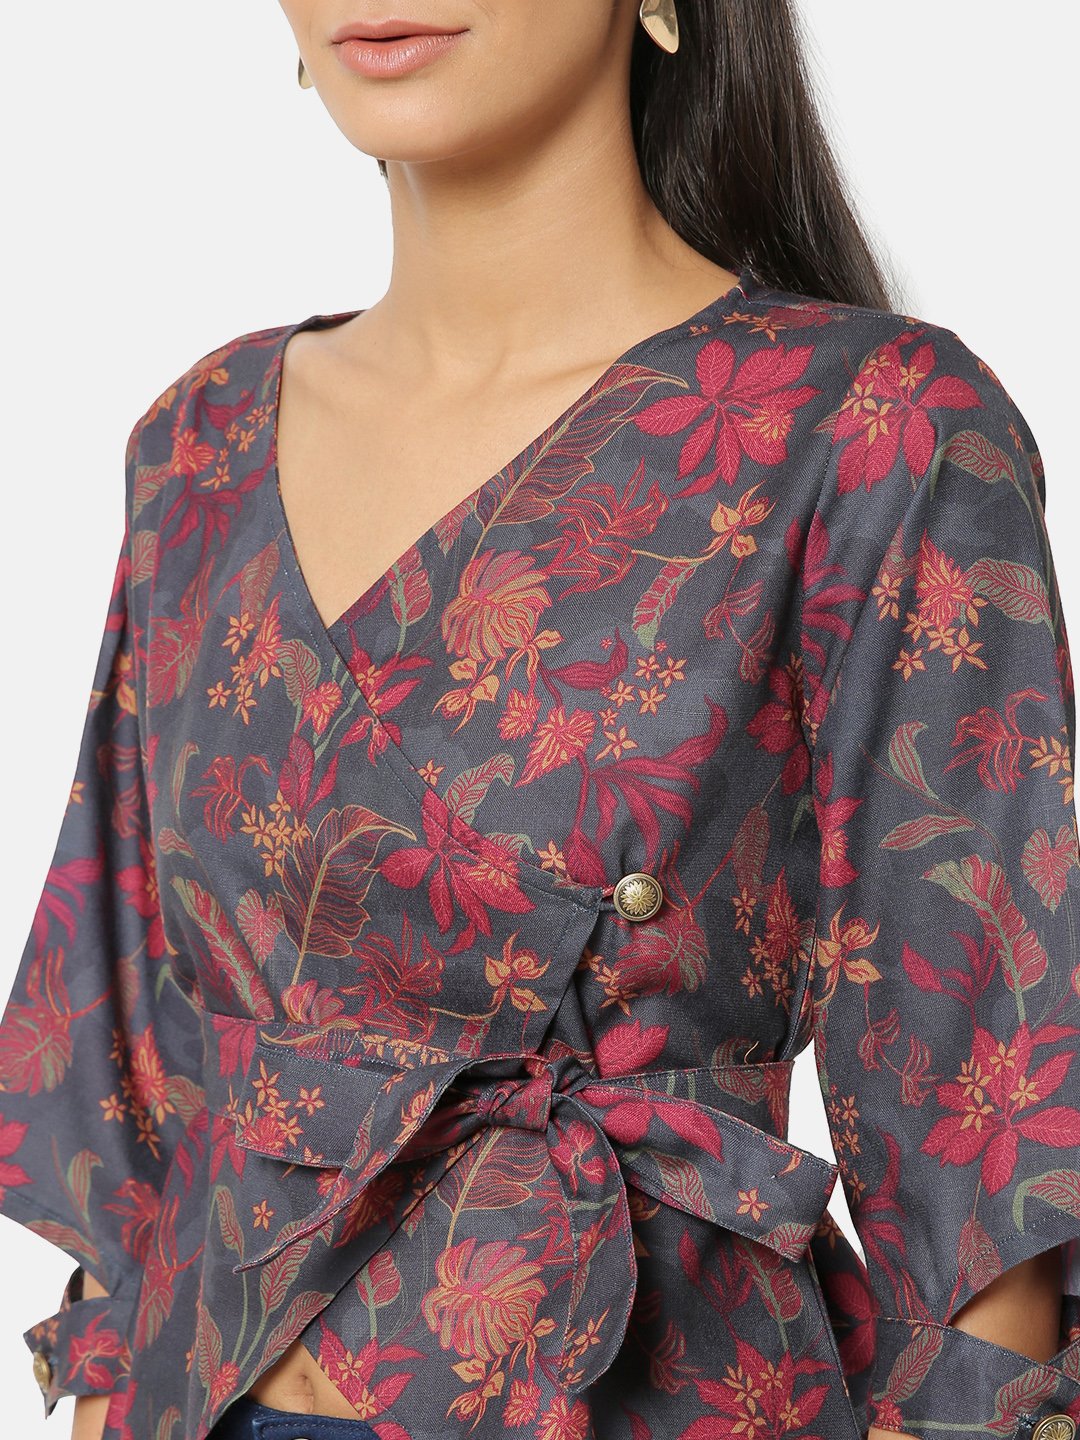 Floral_Printed_Top_Front_Close_Up_1 (6550096674985)